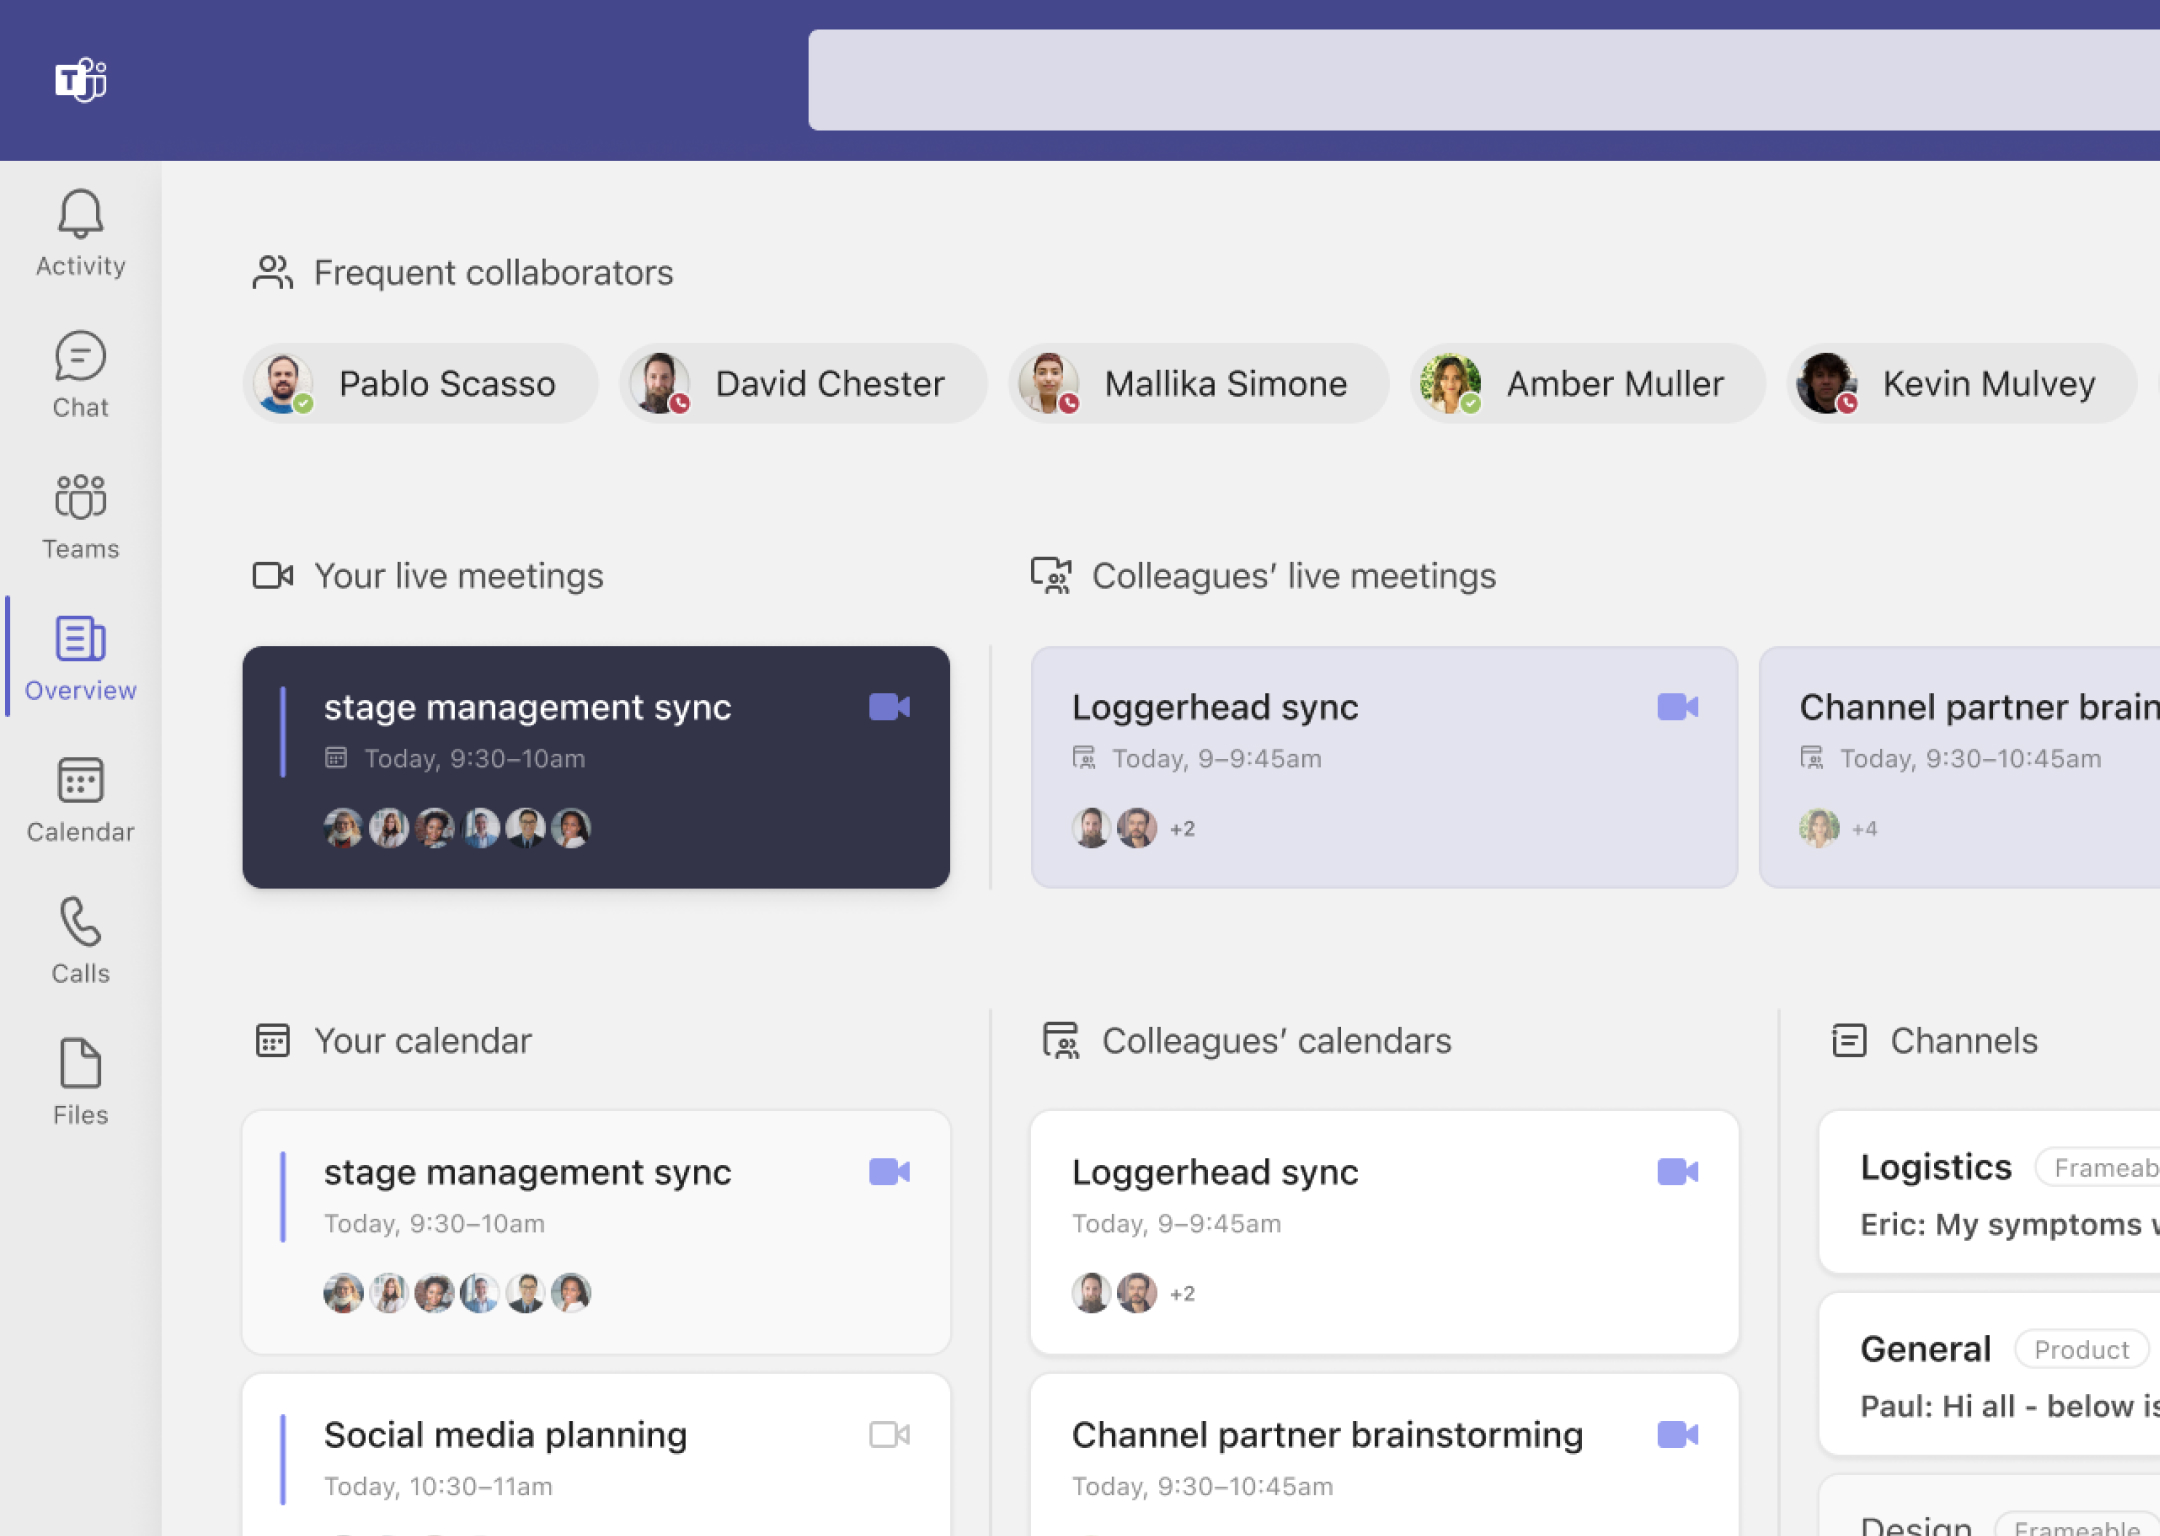 Get more done together, no matter where you are, in Microsoft Teams